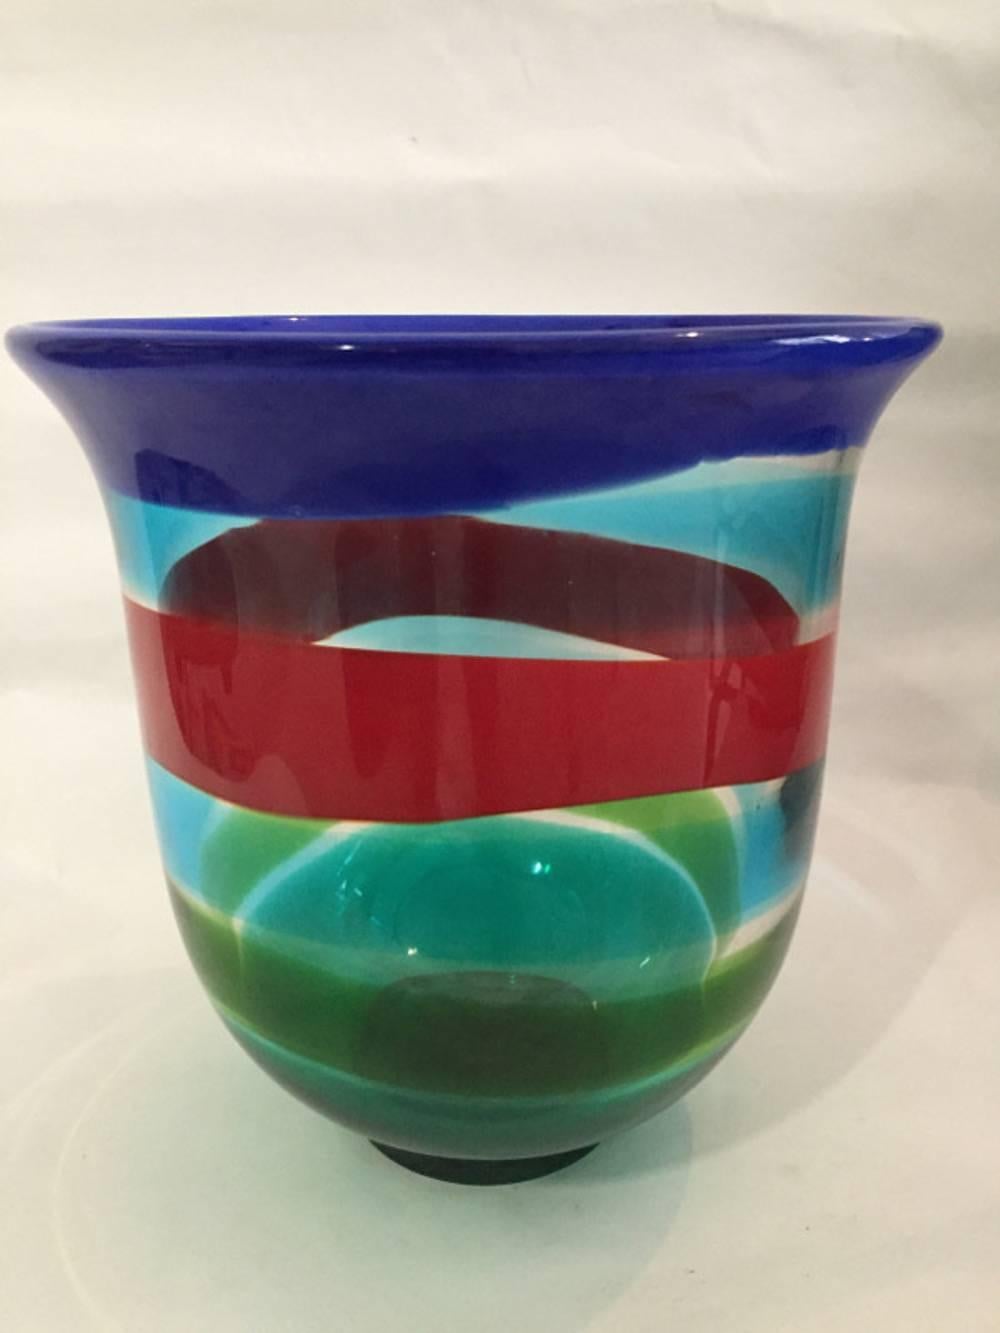 Berit Johansson for Salviati, modern Murano glass vase with blue, yellow, orange and green banded decoration, etched mark Salviati B. Johansson 92.